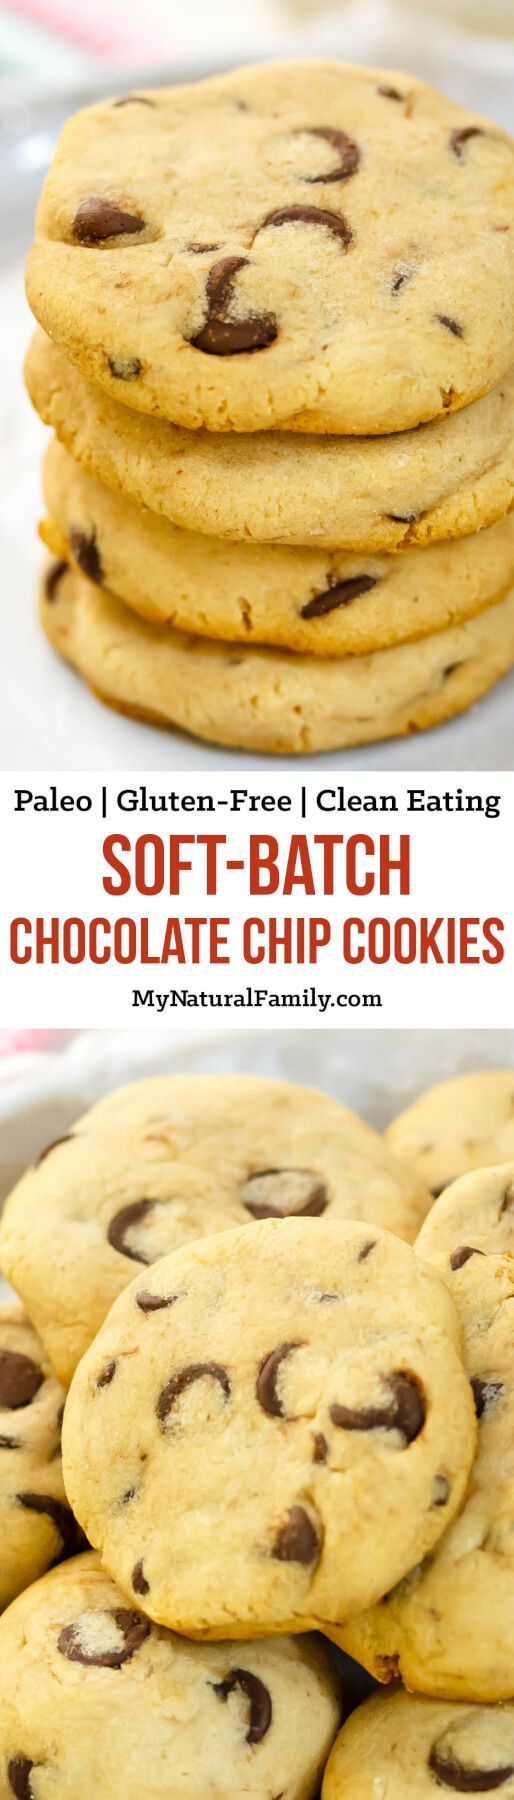 The BEST Soft-Batch Paleo Chocolate Chip Cookies (Paleo, Gluten-Free, Clean Eating